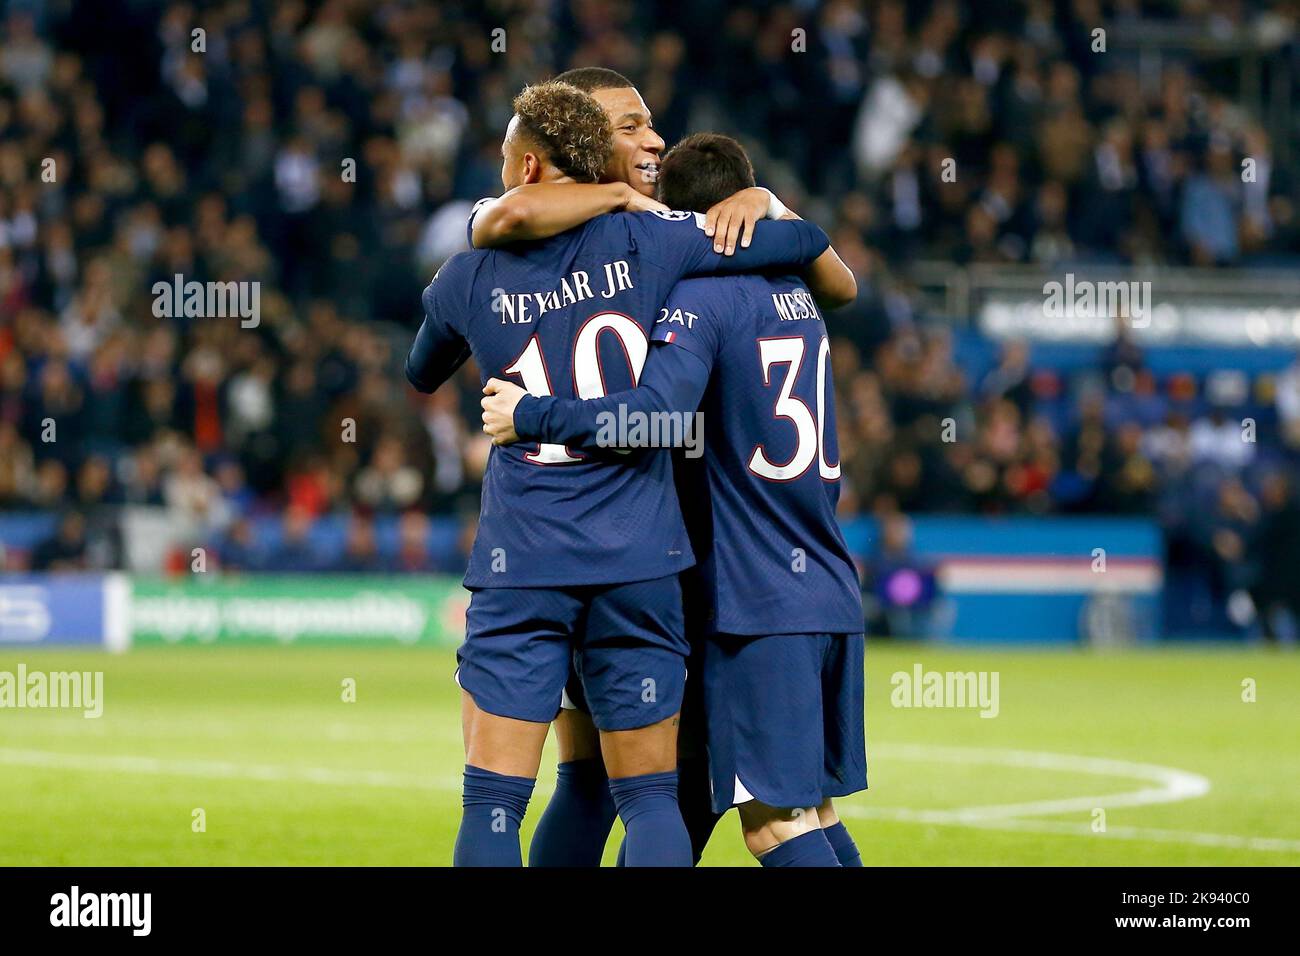 Paris, France. 25th Oct, 2022. (L-R) Neymar, Kylian Mbappe, Lionel Messi (PSG) Football/Soccer : Neymar, Mbappe and Messi celebrate after Neymar's goal during UEFA Champions League group stage Matchday 5 Group H match between Paris Saint-Germain 7-2 Maccabi Haifa FC at the Parc des Princes in Paris, France . Credit: Mutsu Kawamori/AFLO/Alamy Live News Stock Photo